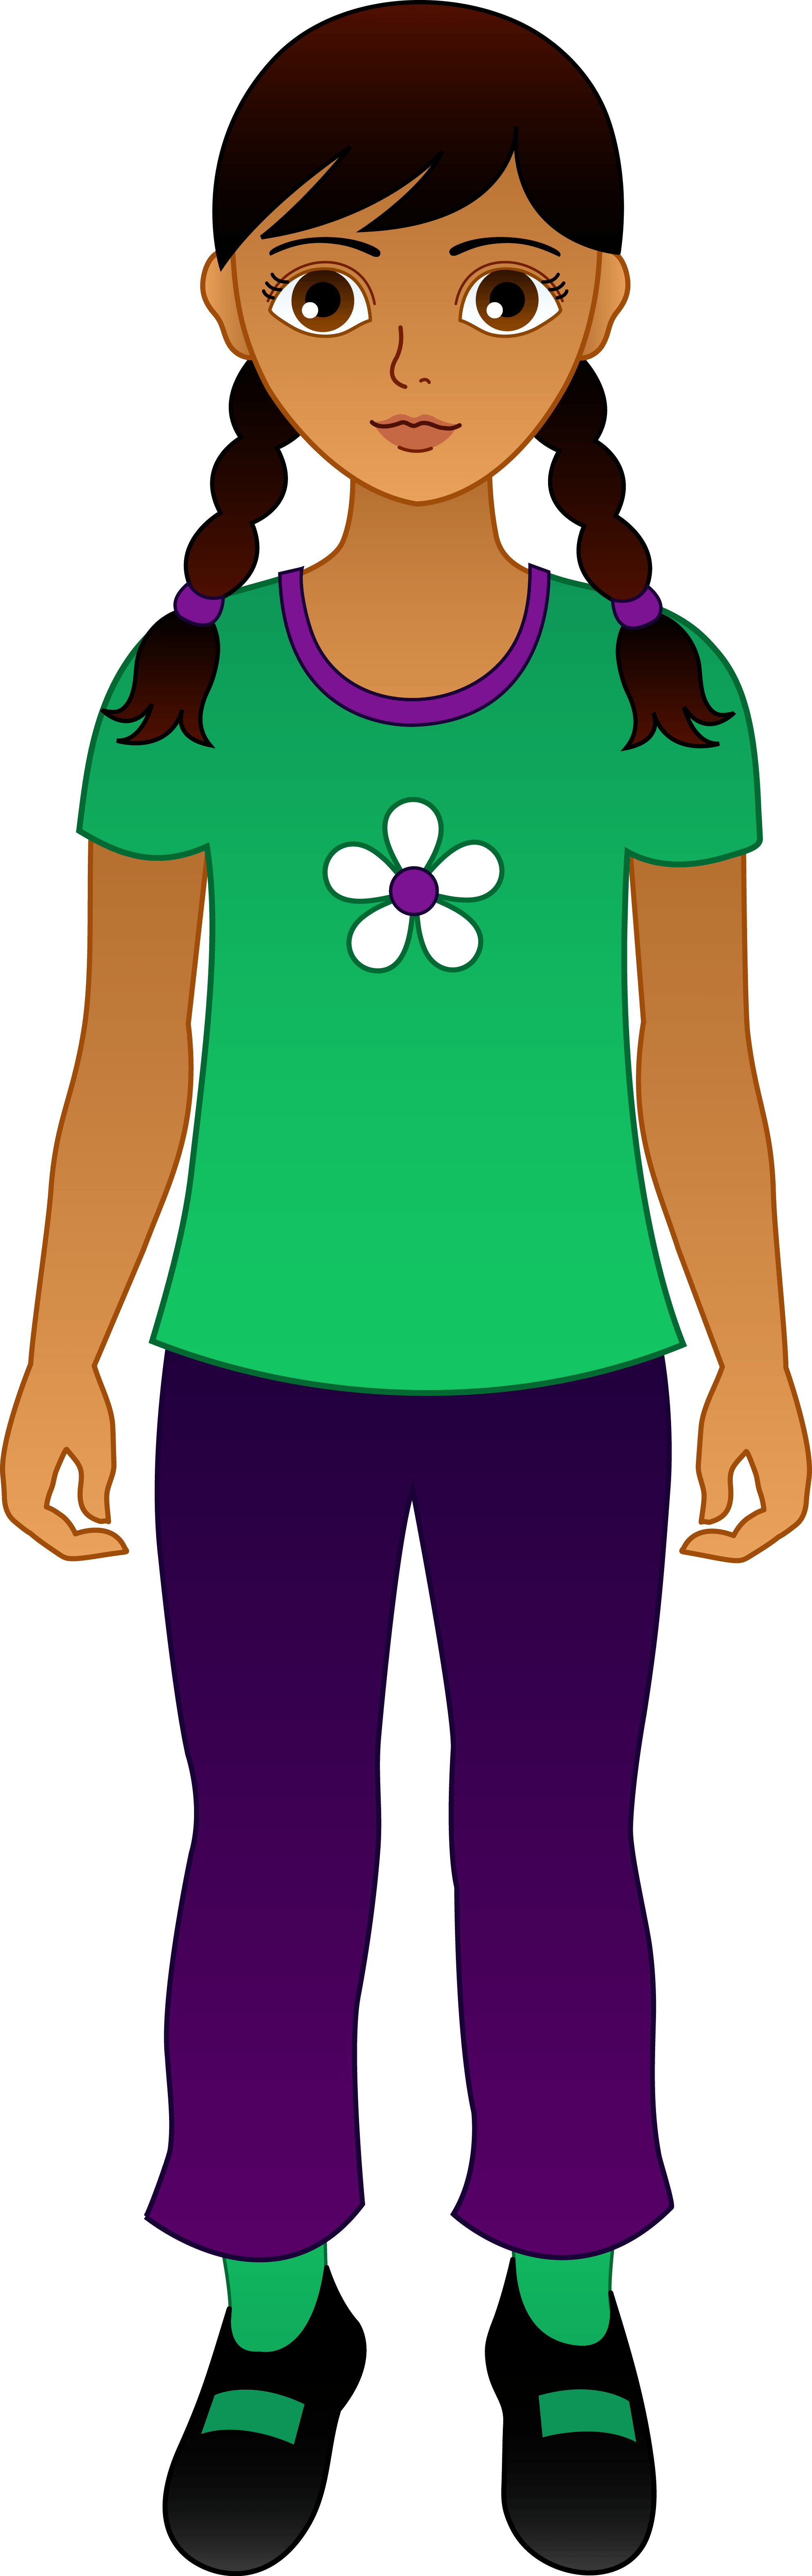 Shirts clipart animated. Cartoon mexican girl image